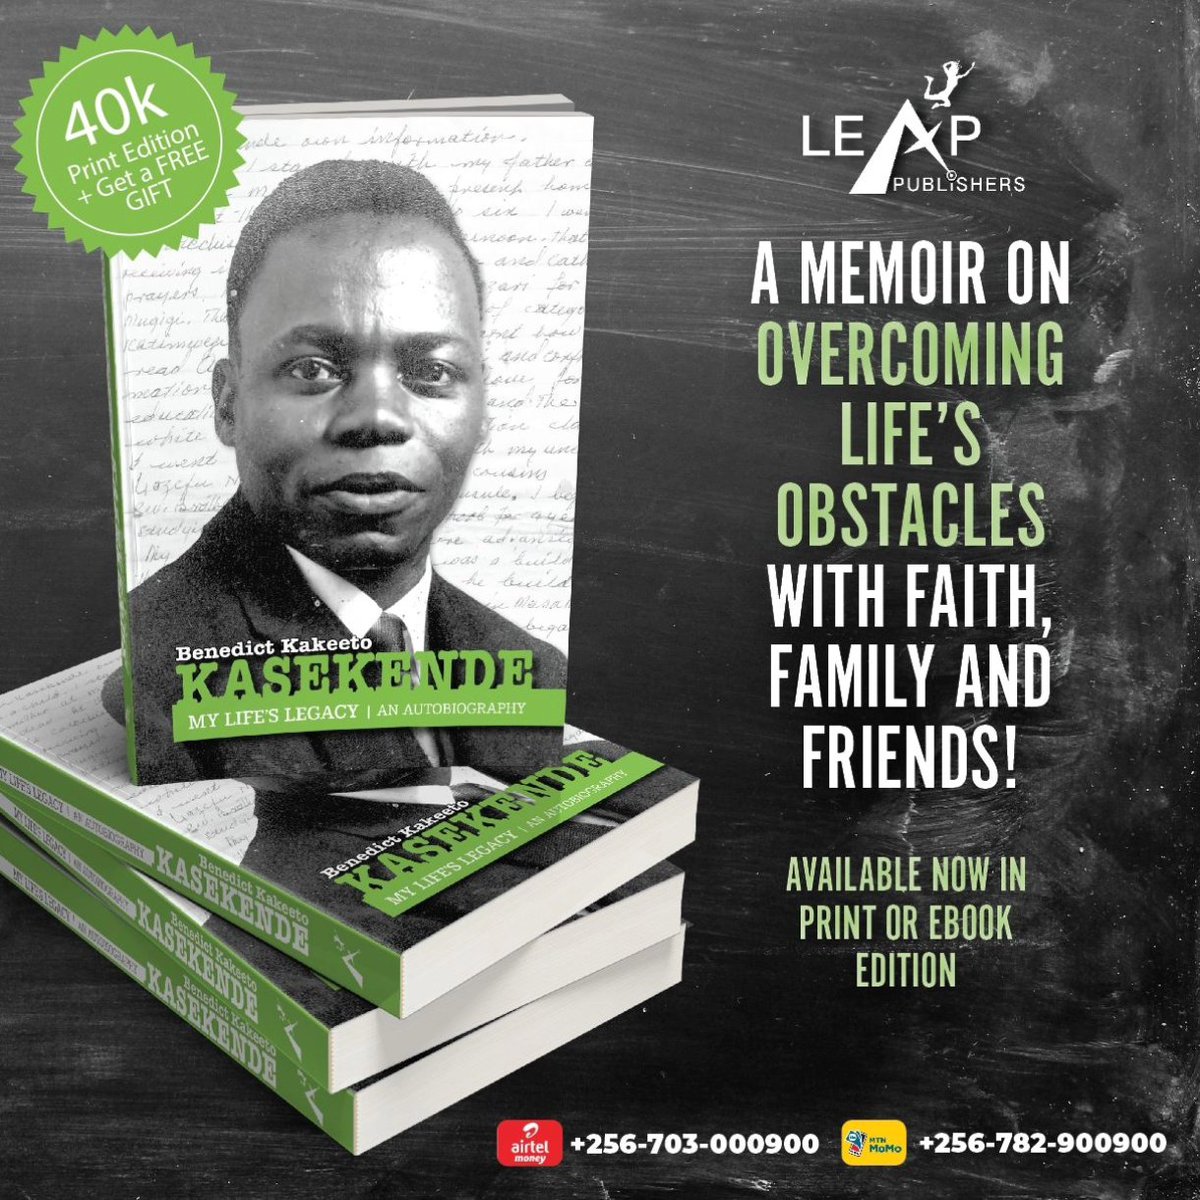 ***A Benedict Kakeeto KASEKENDE Memoir*** 'Be someone who history praises because you have stood the test of time and come out on top..' BK Launch Uploading. Watch this Space....💥💥💃🙌 #transforminglives #buildinglegacies